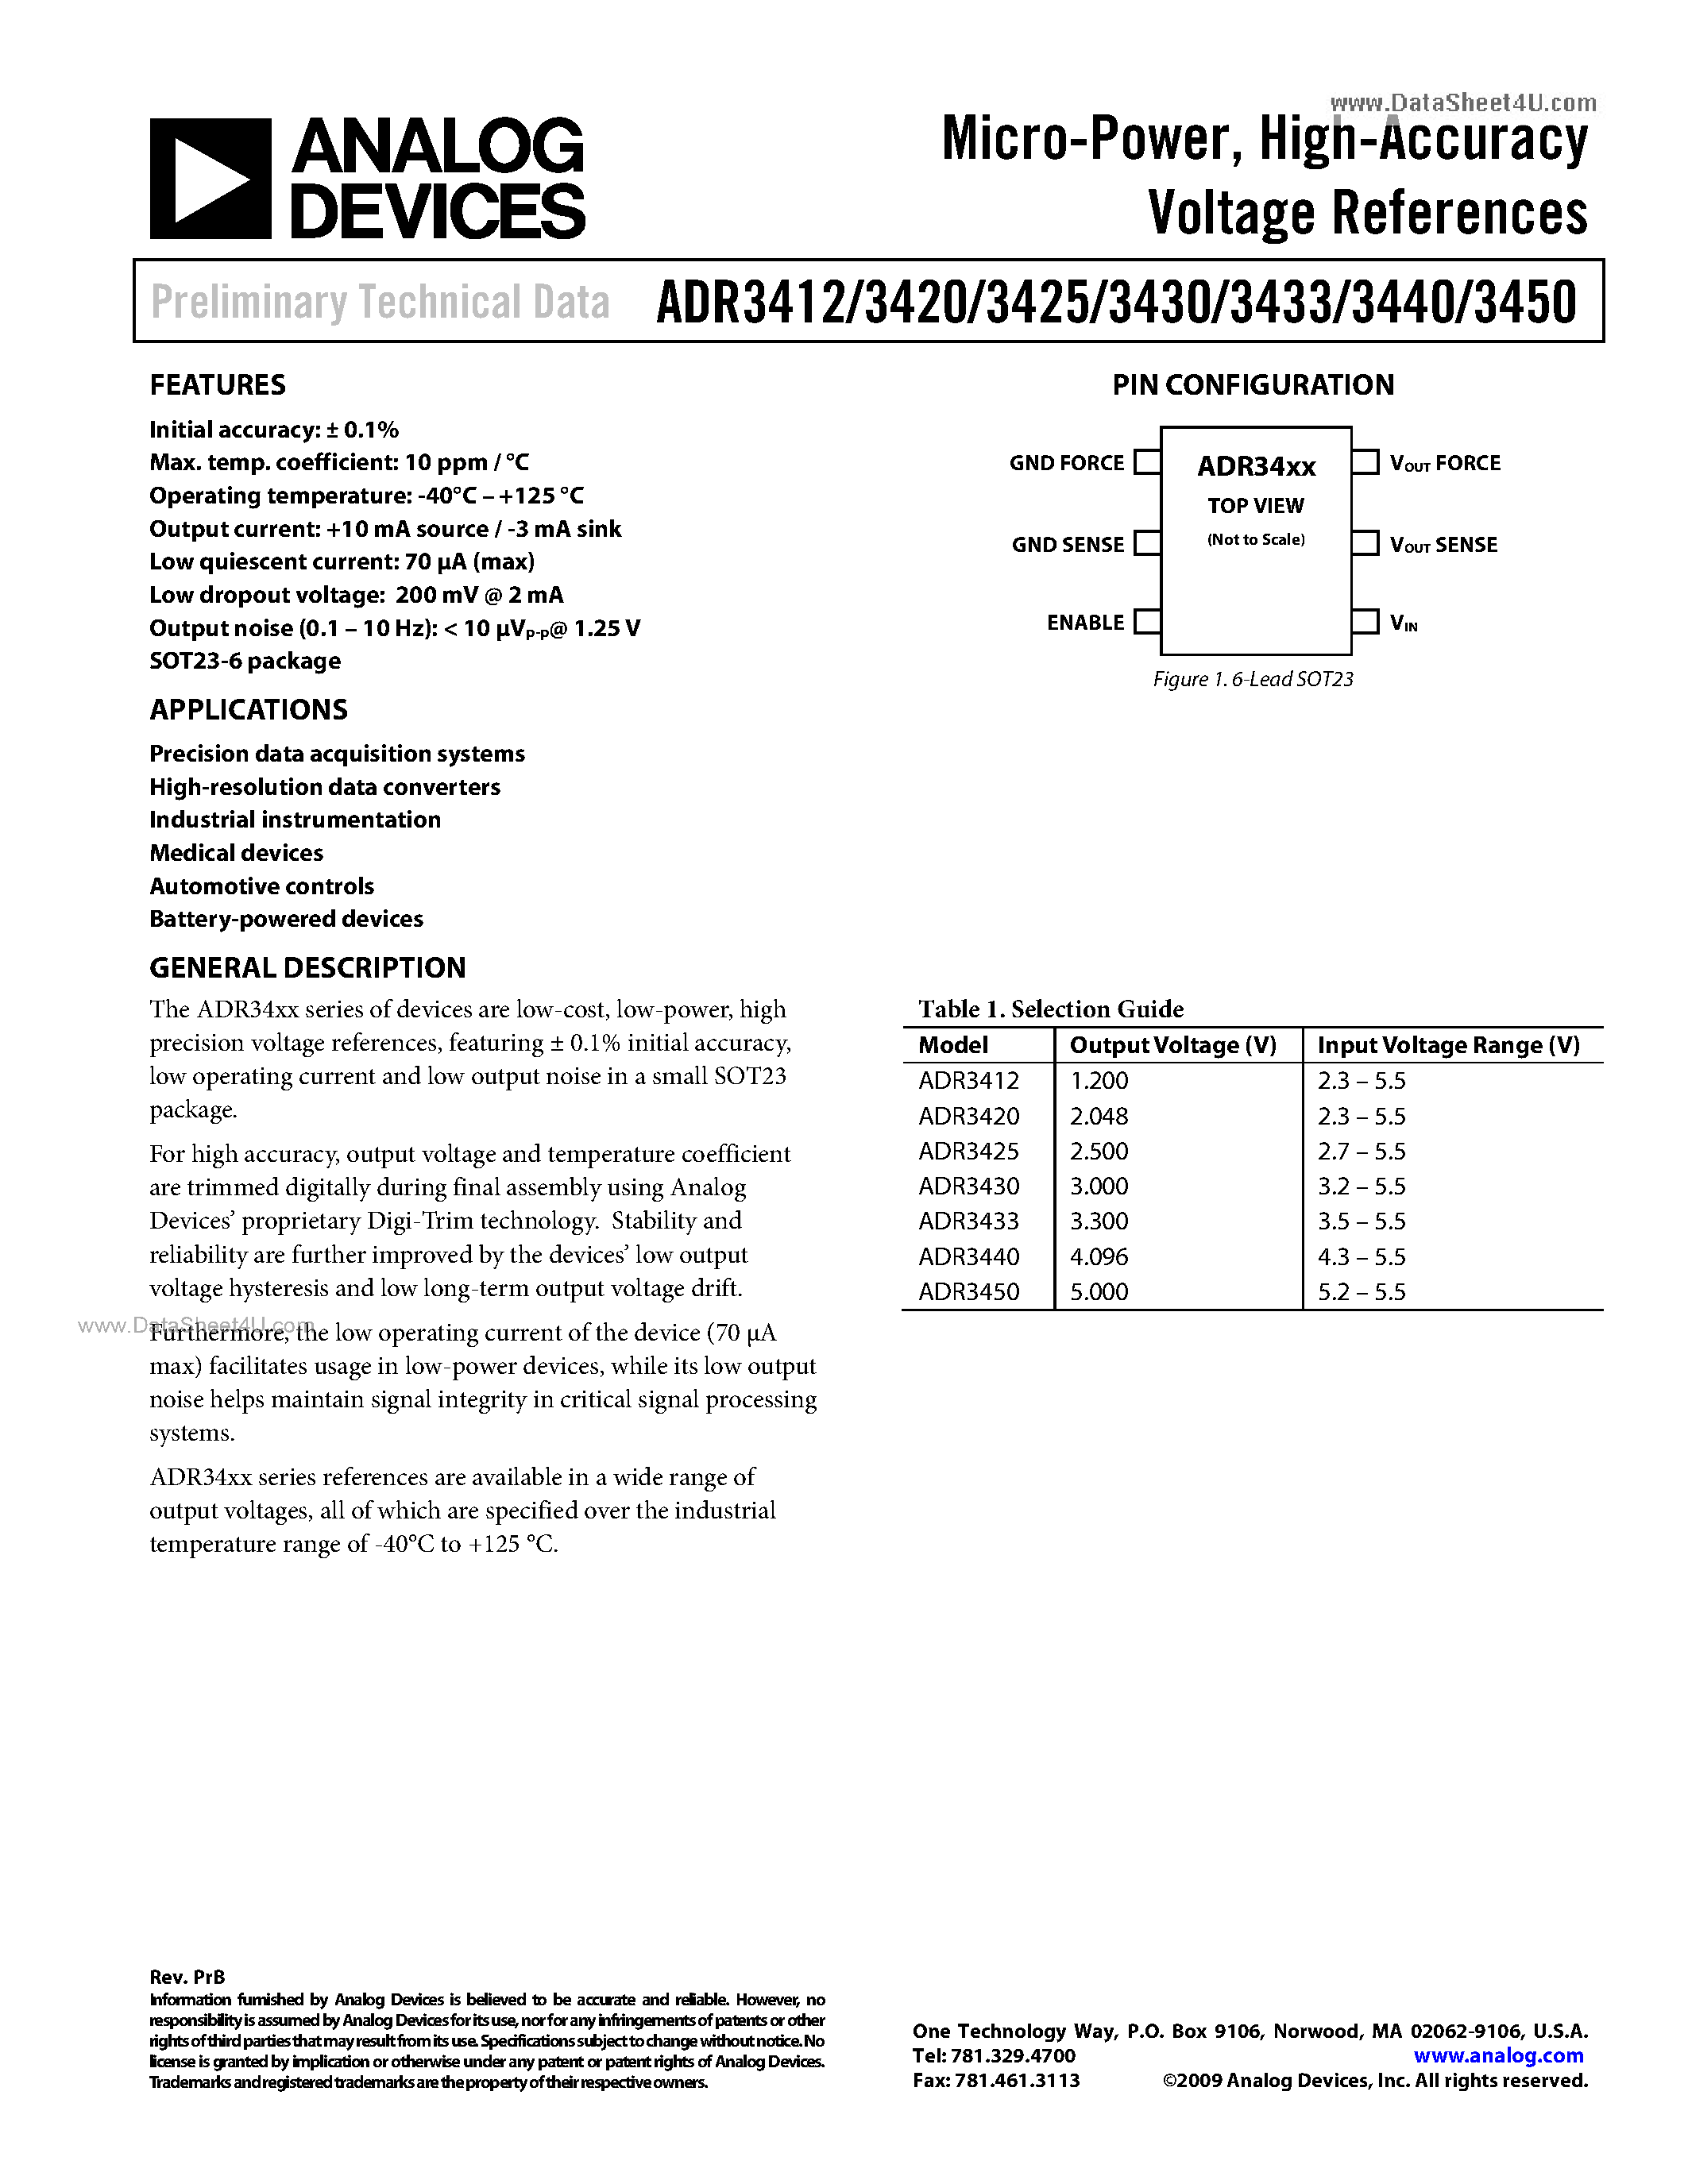 Datasheet ADR3412 - (ADR3412 - ADR3450) HIGH-ACCURACY VOLTAGE REFERENCES page 1